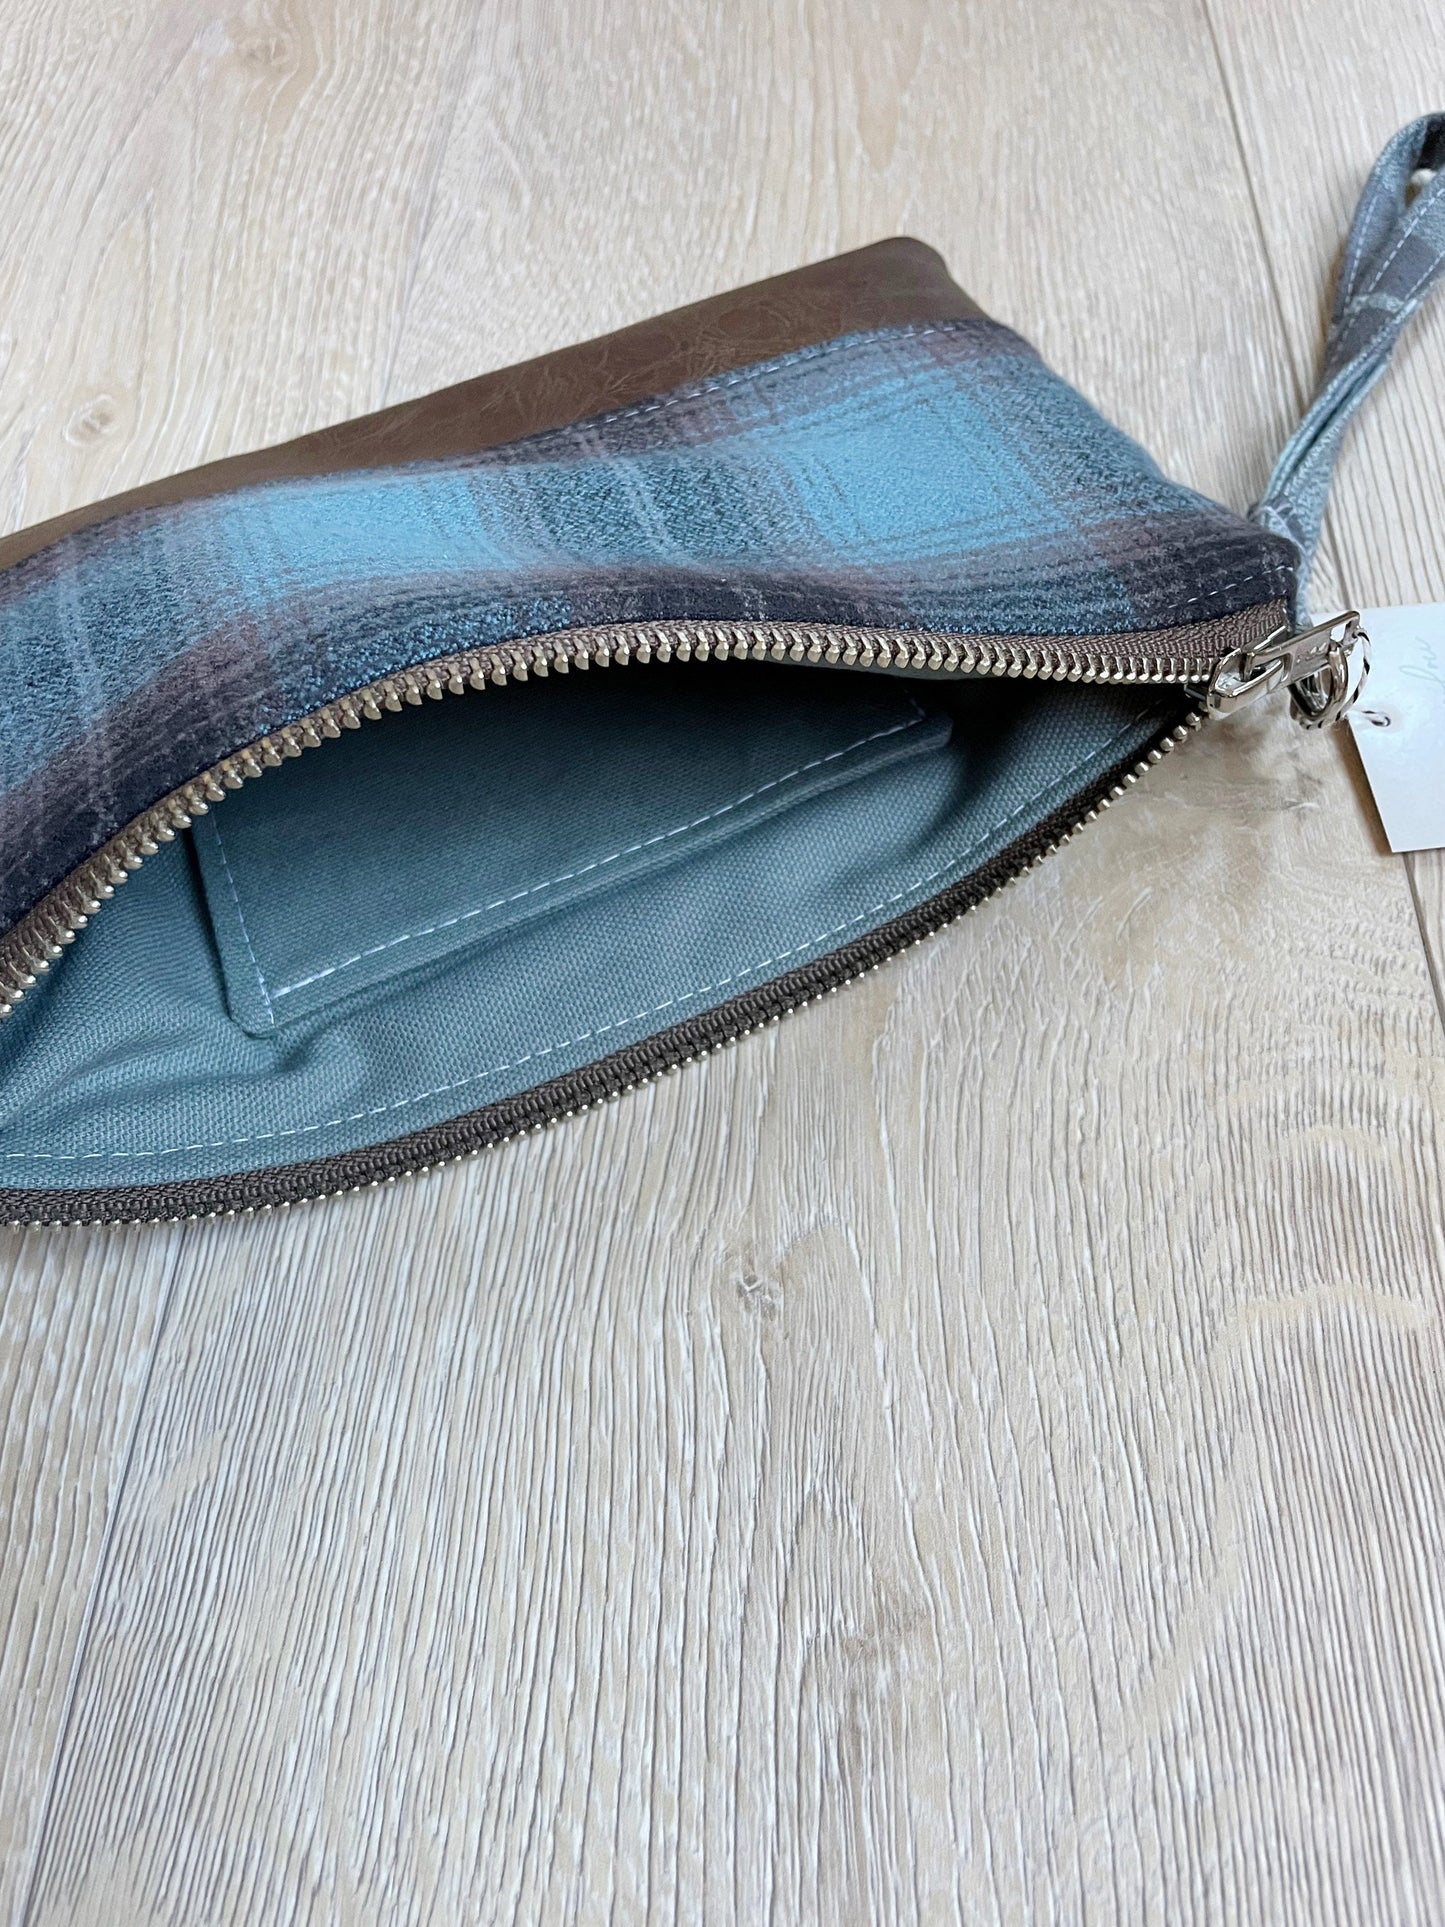 blue black and brown flannel wristlet with brown vinyl bottom. matching wrist strap. gray lining with slip pocket for cards 